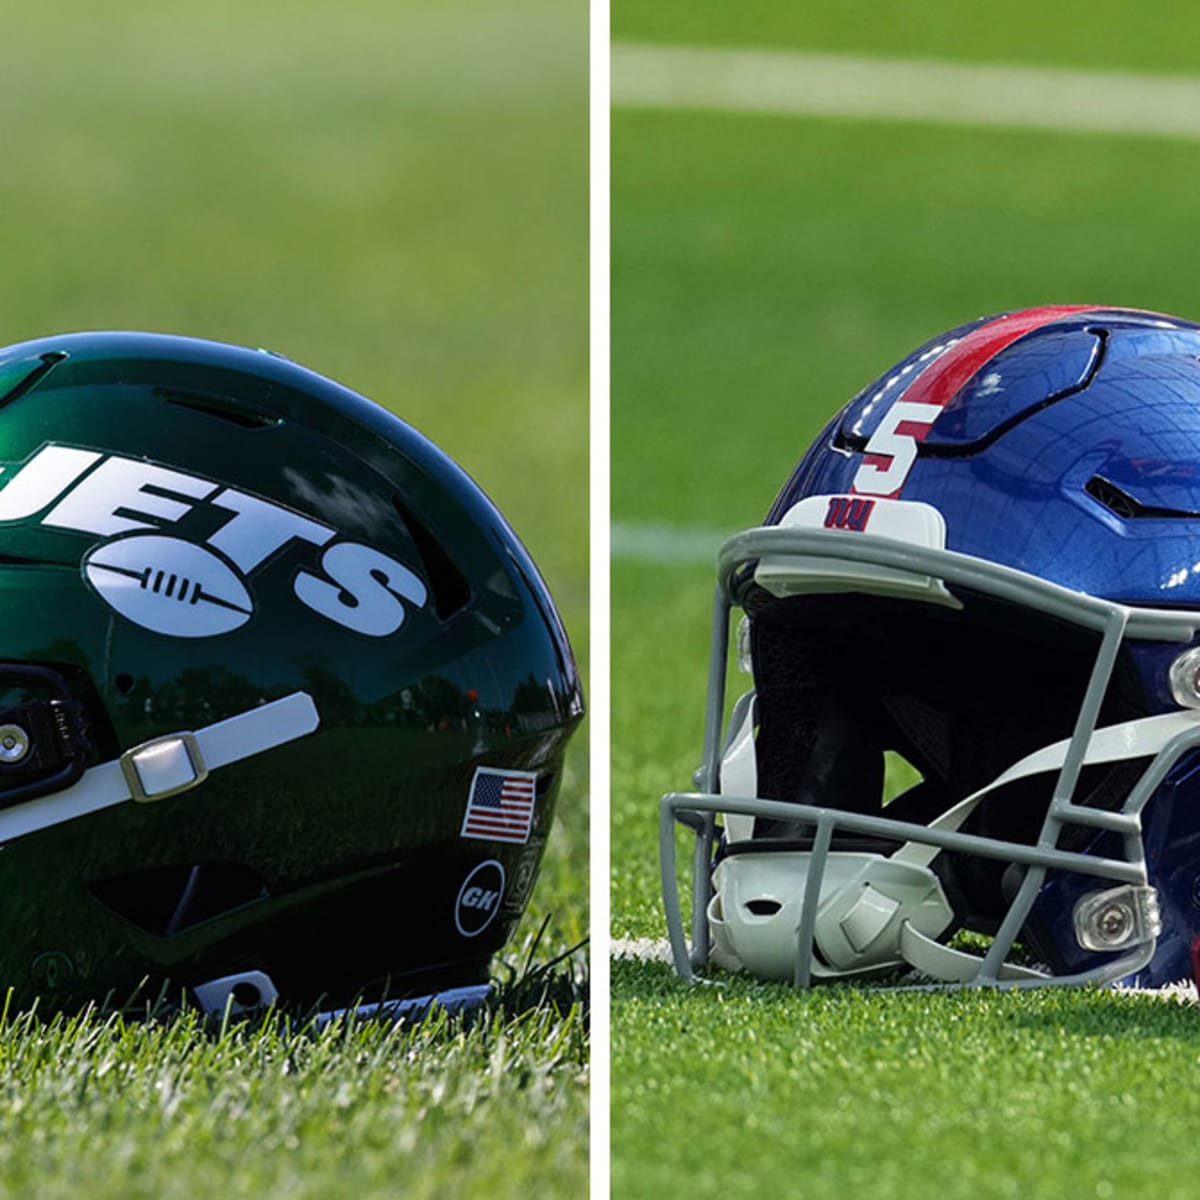 Fan sues Giants, Jets for $6 billion demanding both teams leave New Jersey  and play home games in New York 